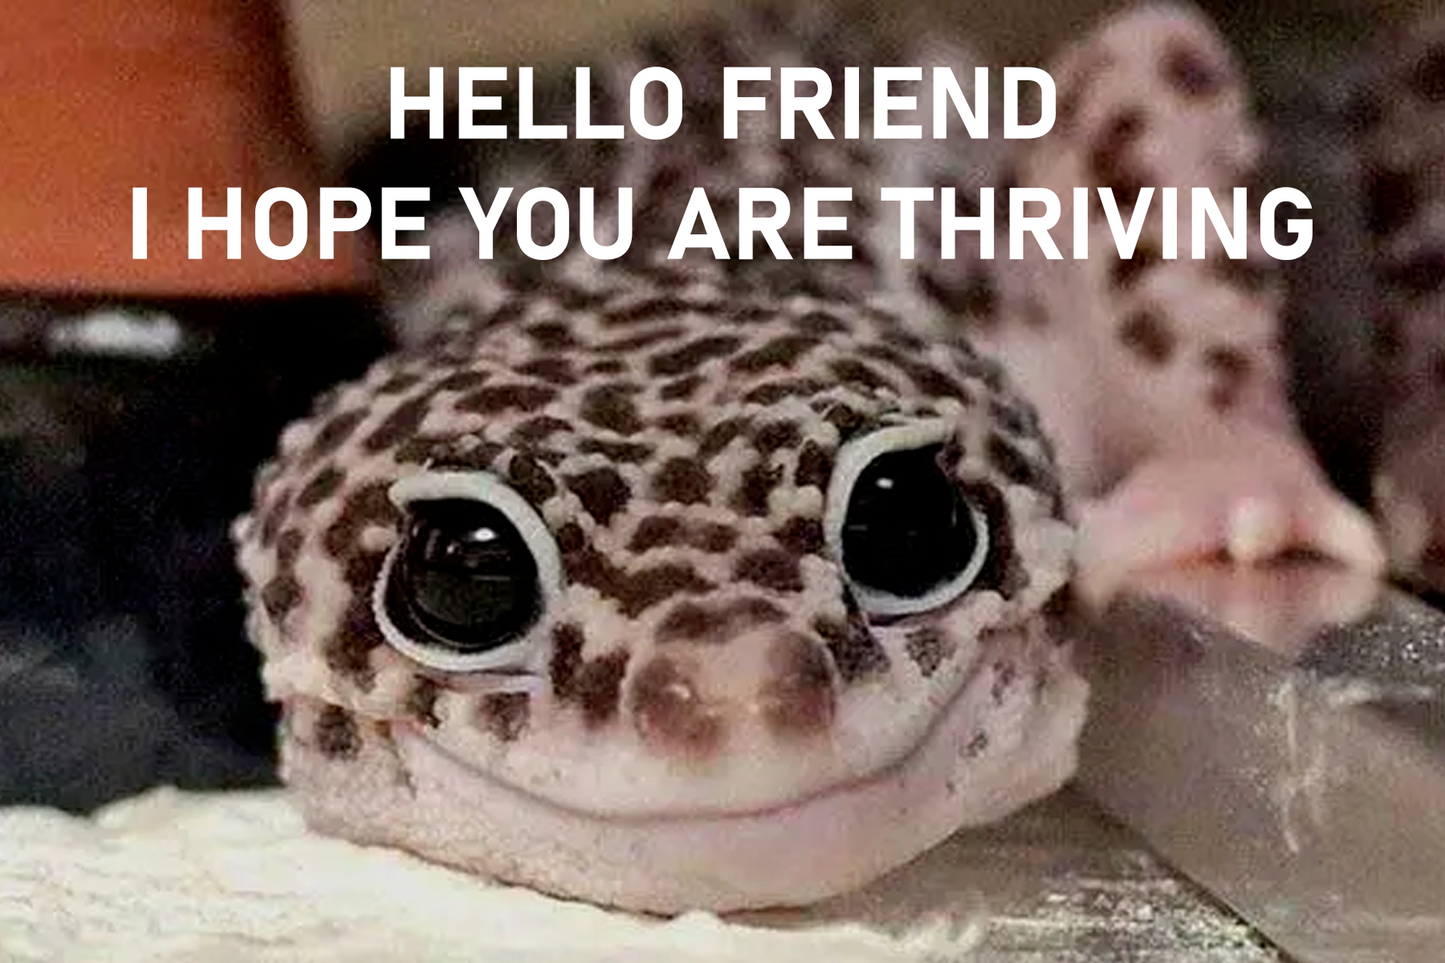 Hello friend I hope you are thriving post card with smiling lizard